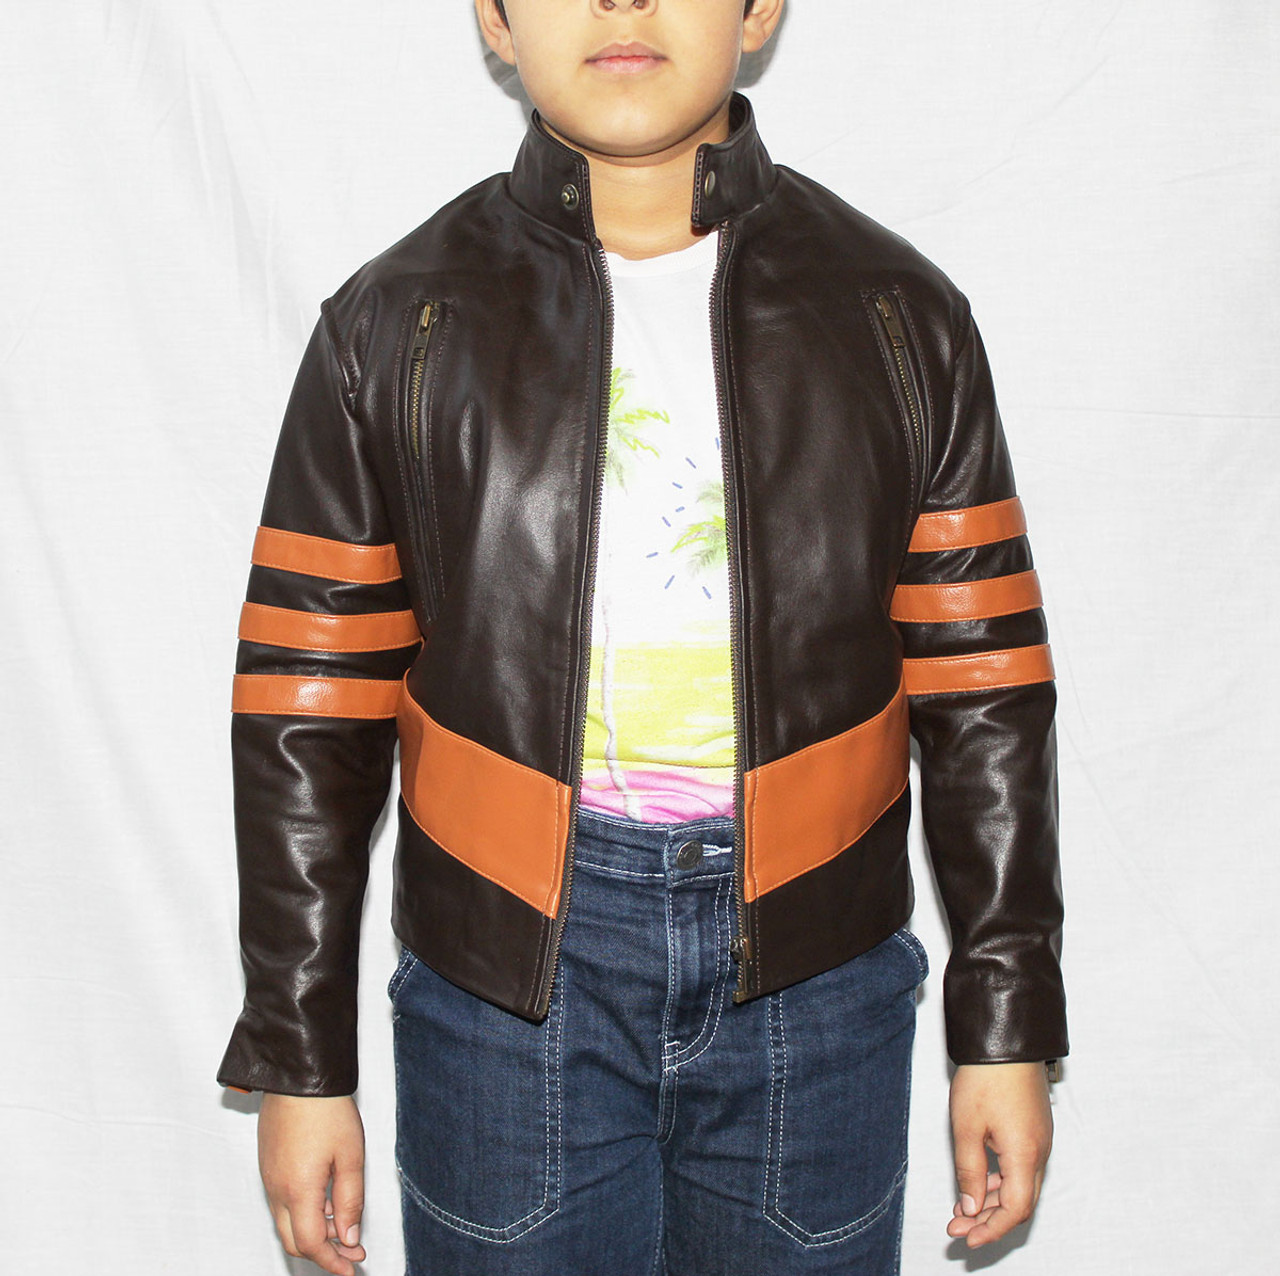 motorcycle jackets for kids